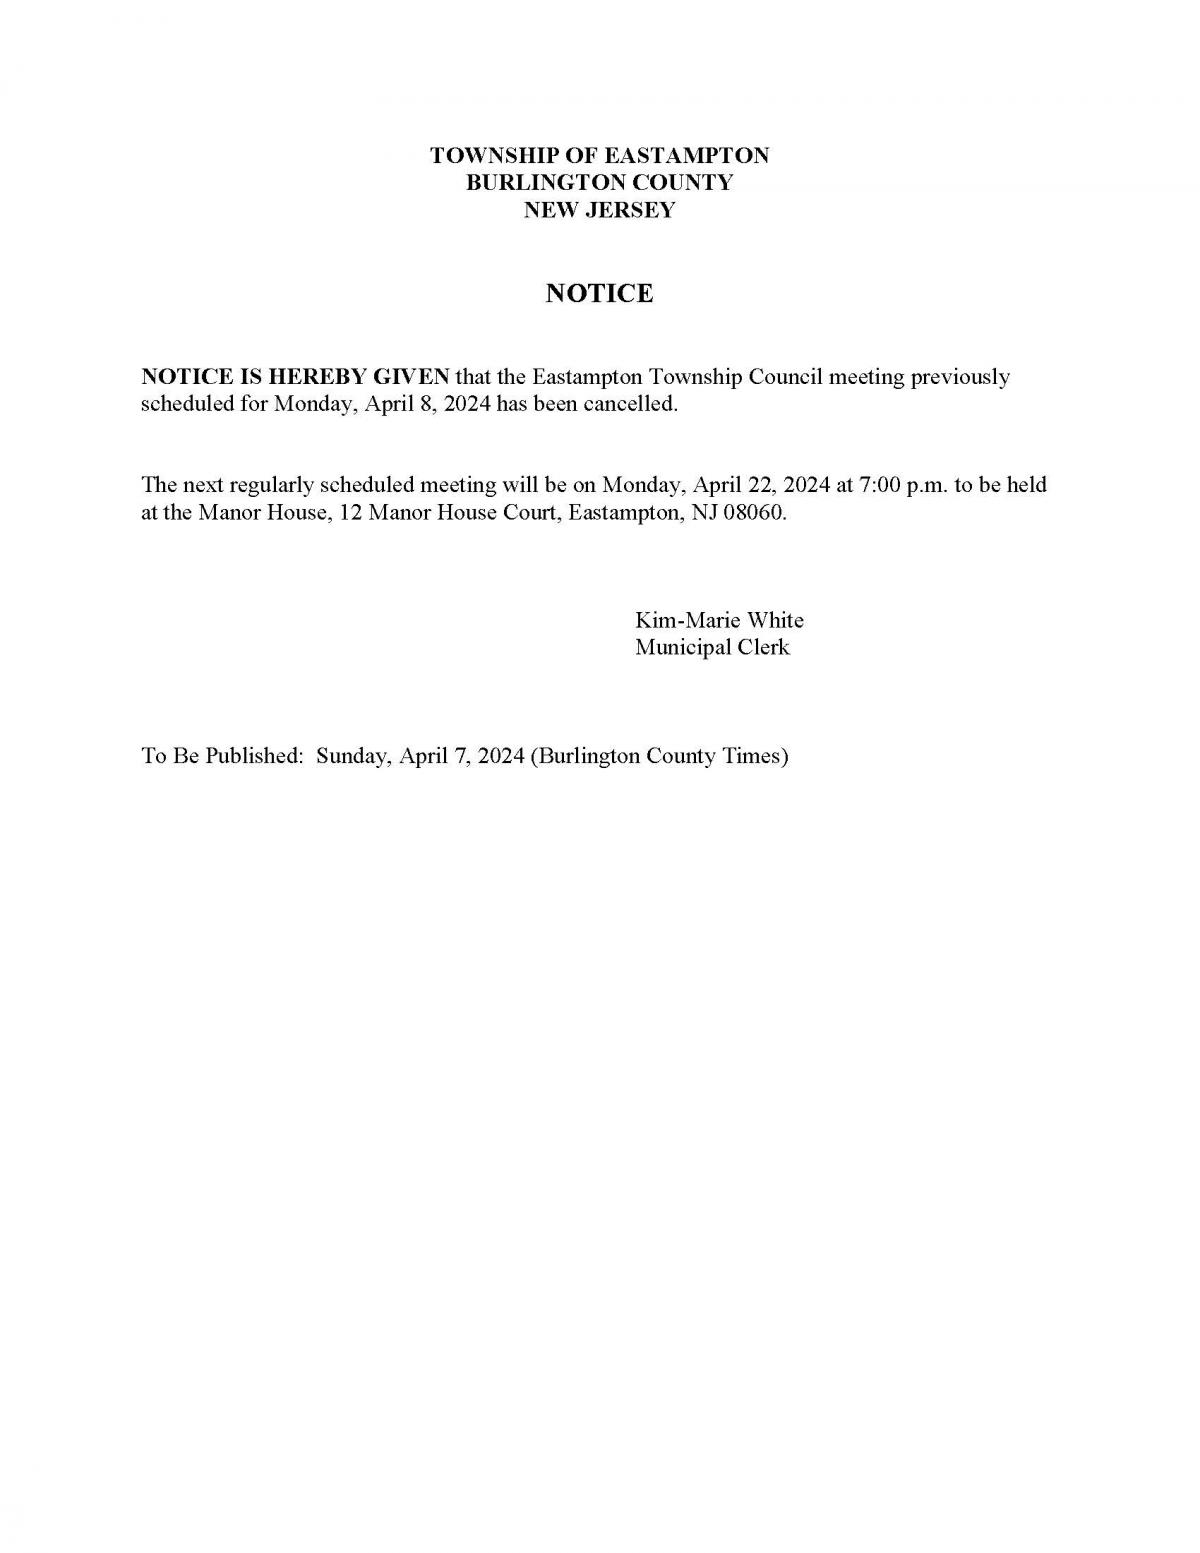 April 8, 2024 Township Council Meeting Cancelled Notice